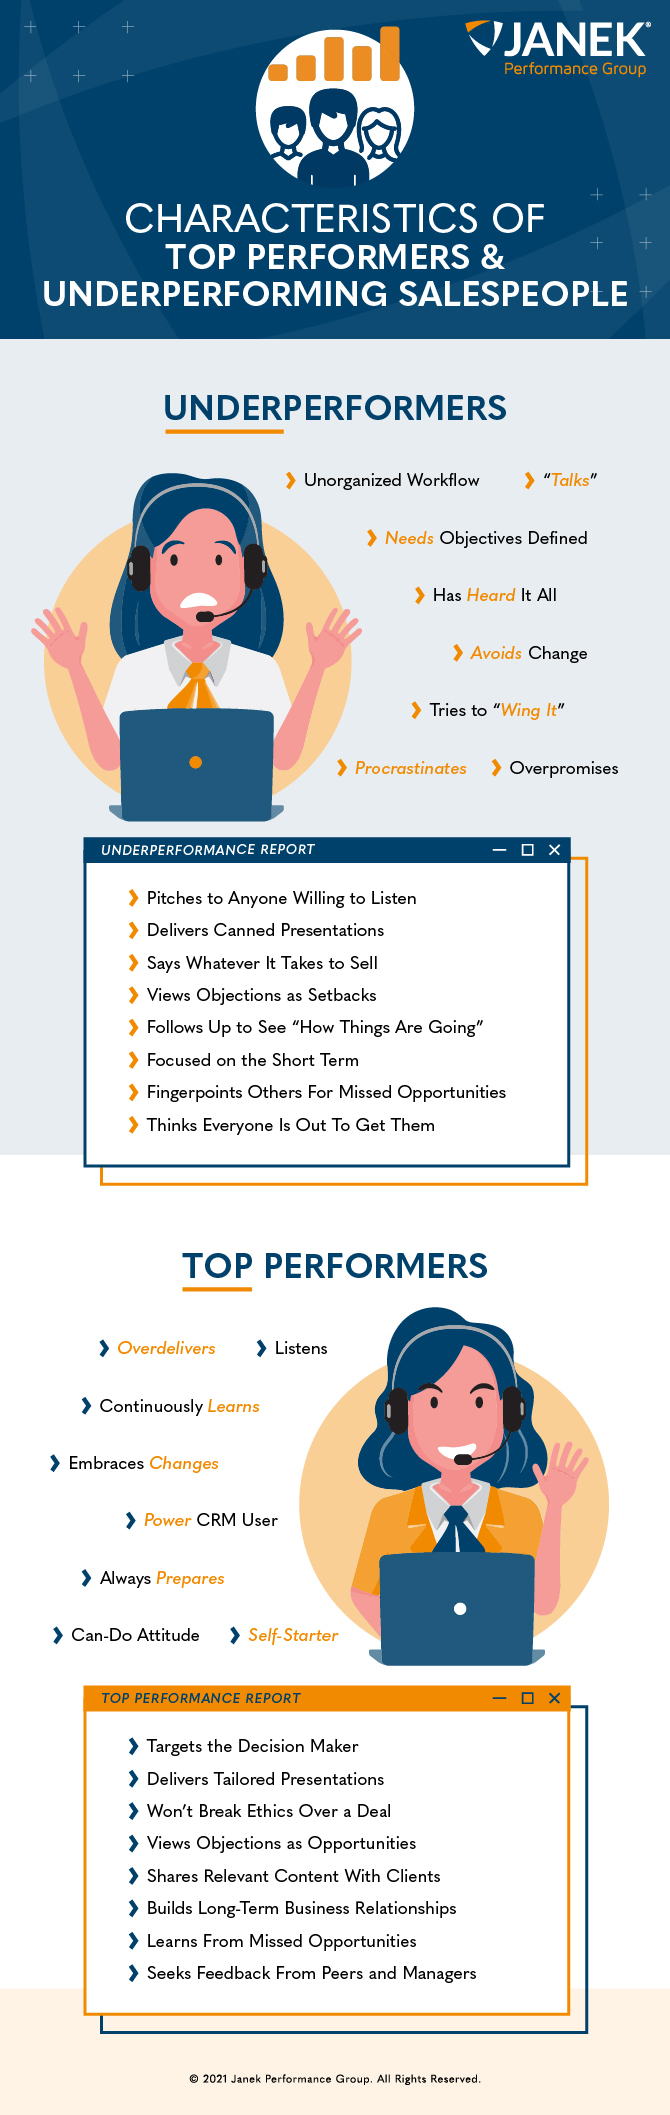 The Characteristics of Top Performers and Underperforming Salespeople